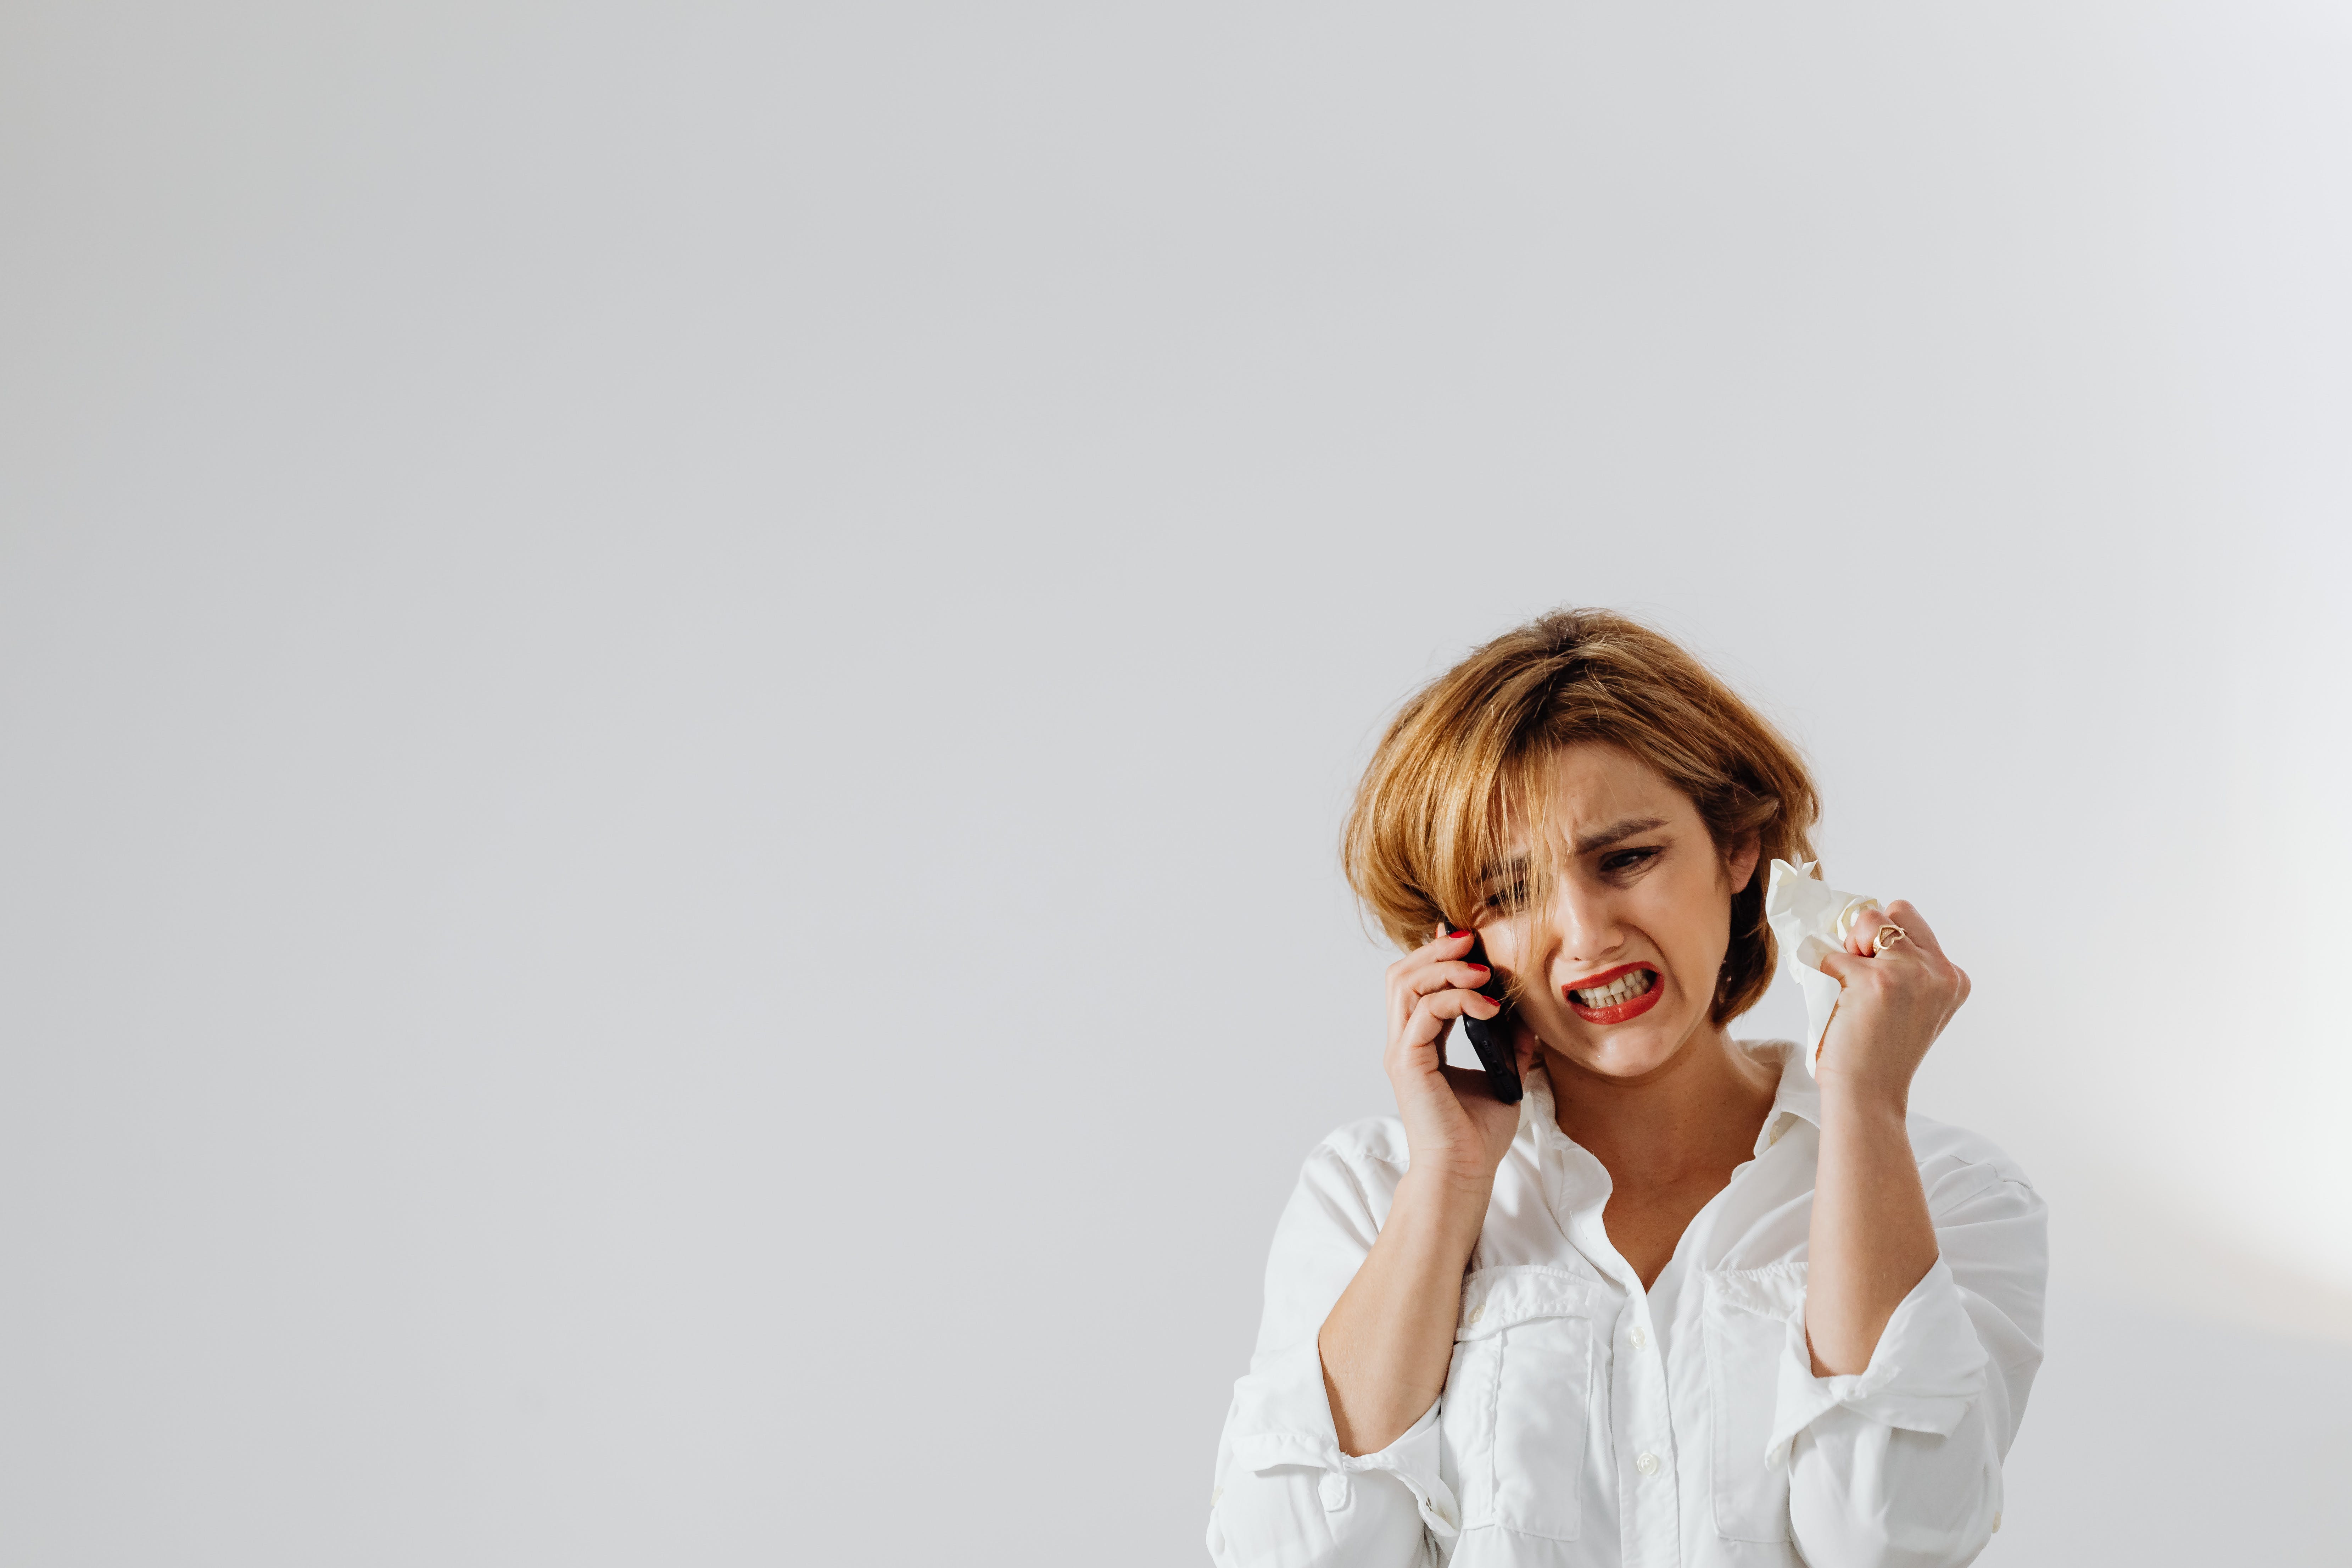 A woman looking angry while on a phone call | Source: Pexels